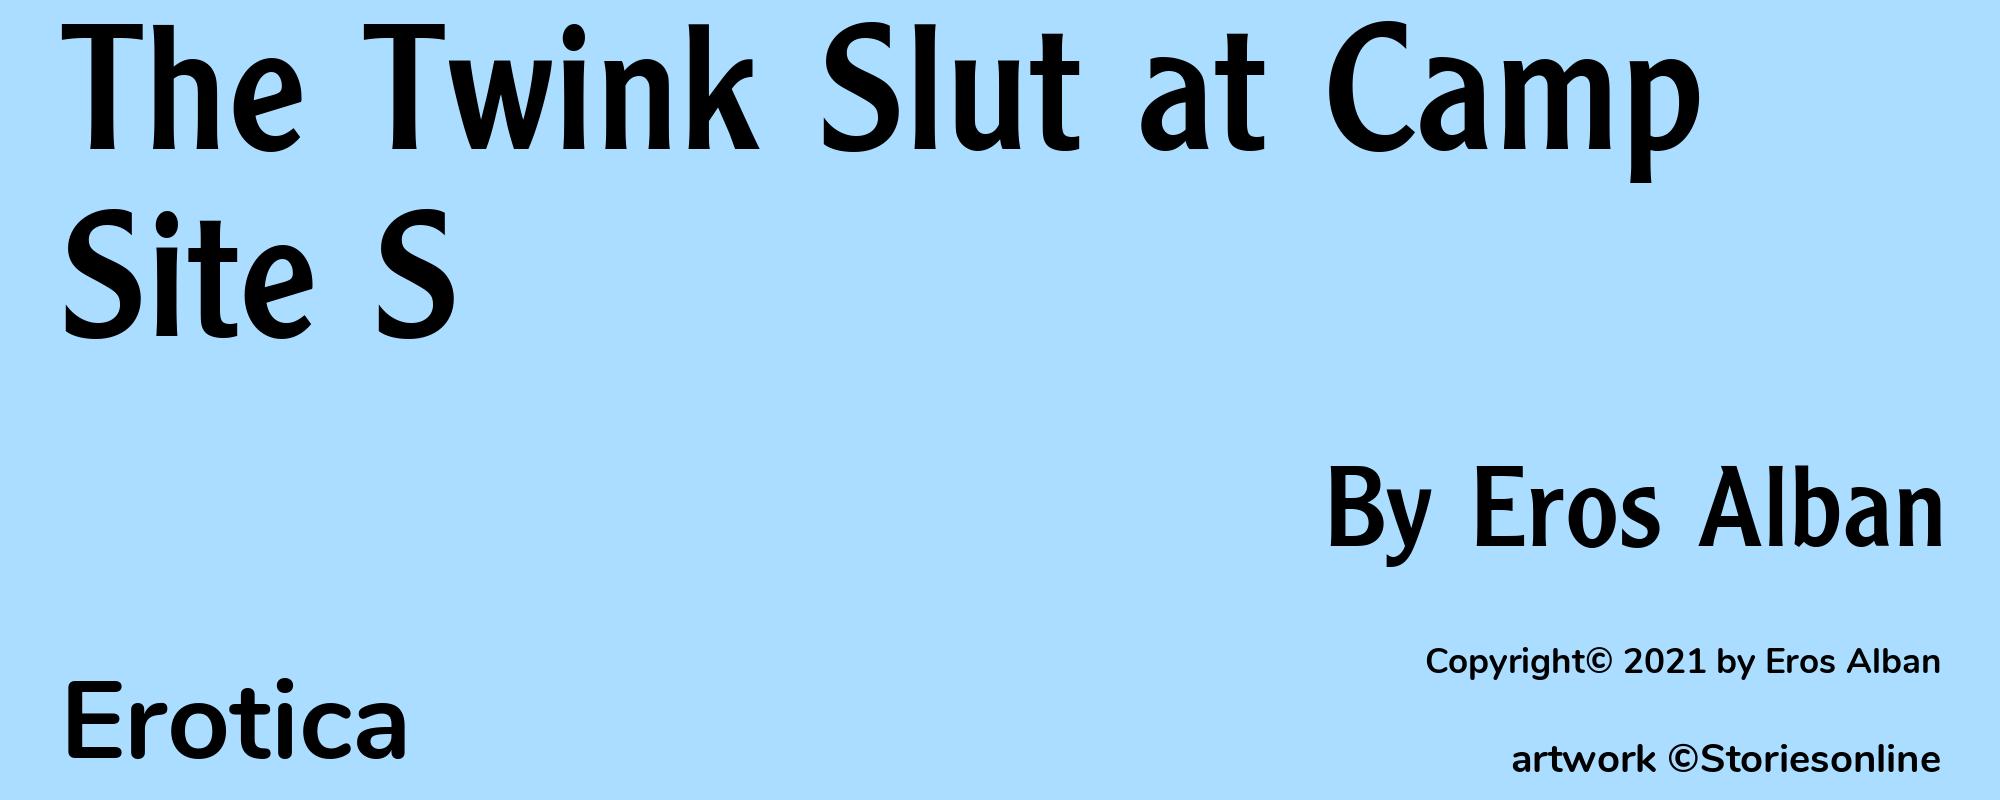 The Twink Slut at Camp Site S - Cover